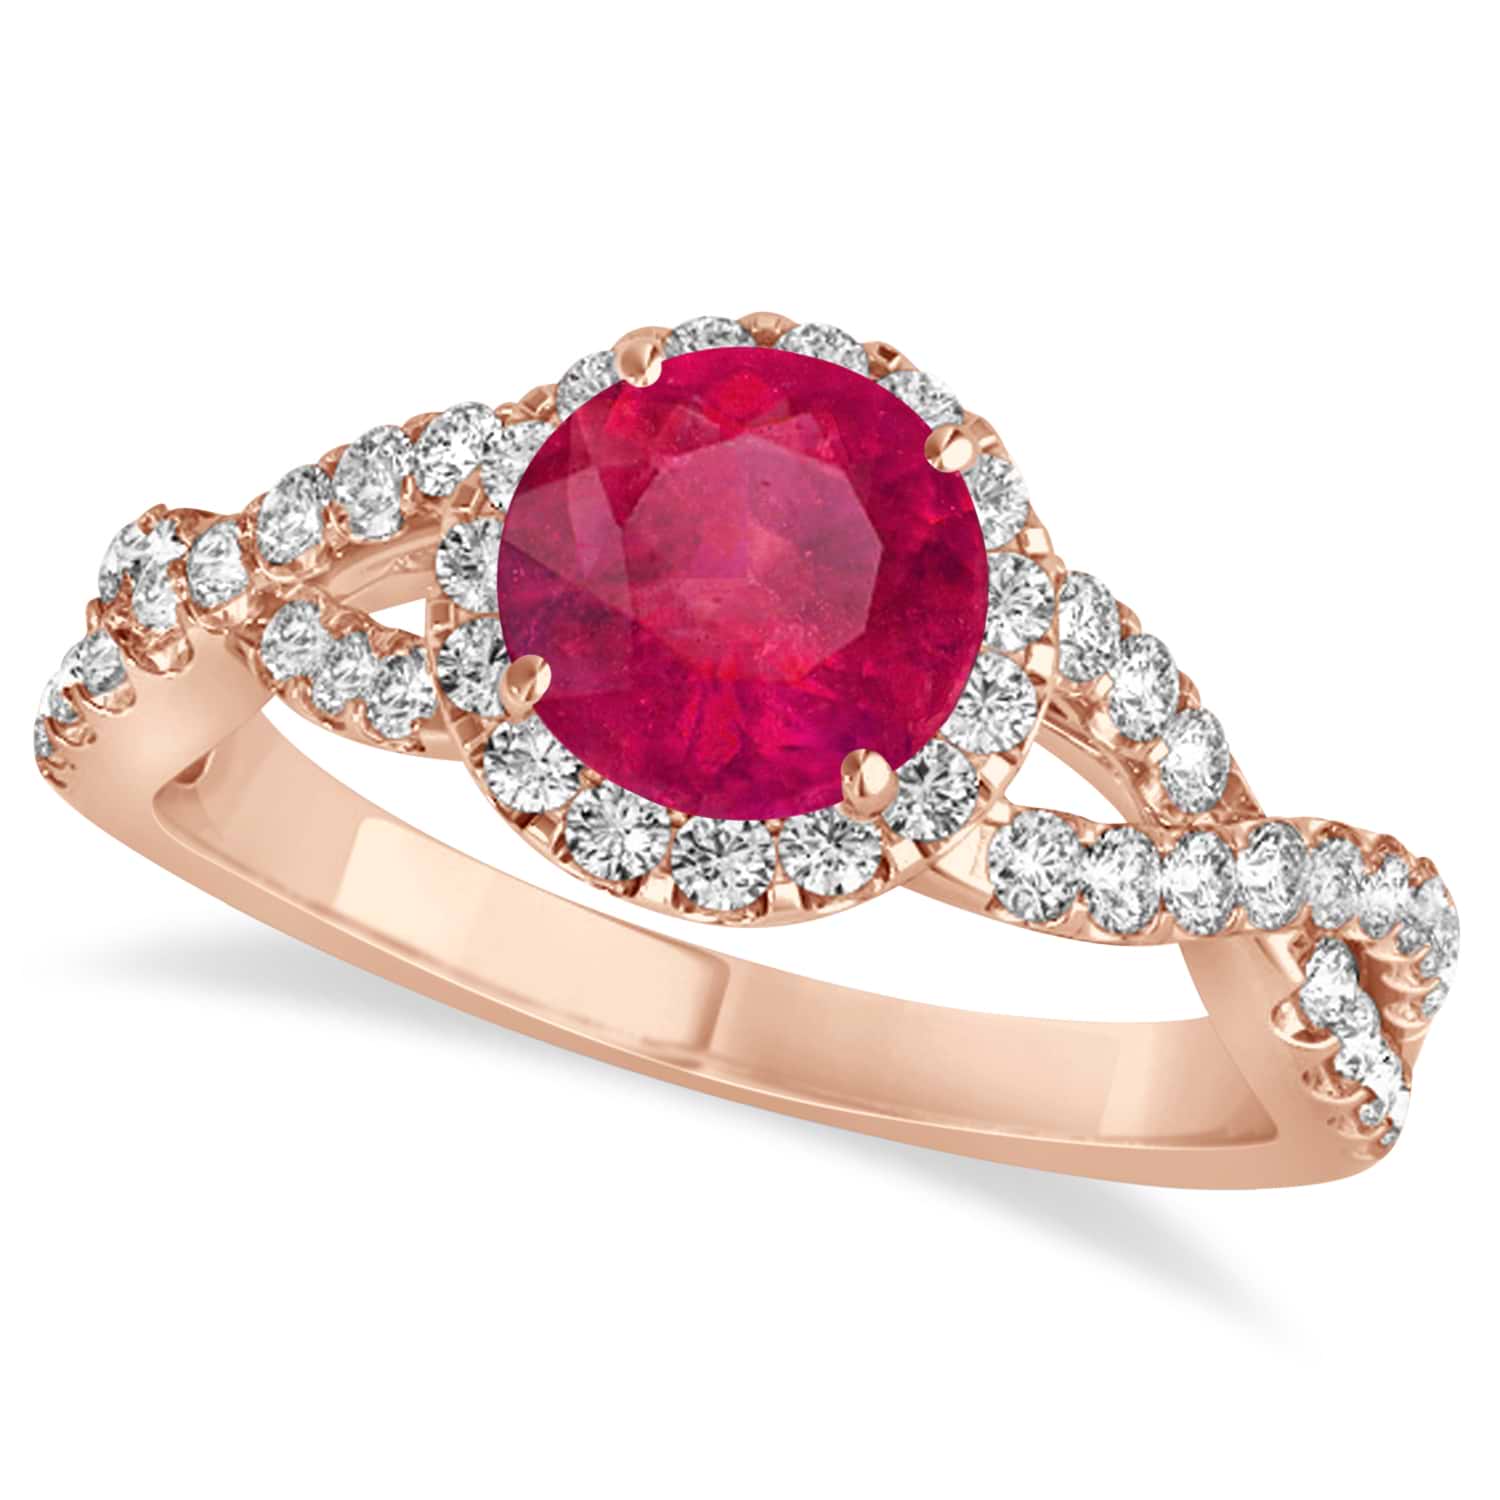 Ruby & Diamond Twisted Engagement Ring 18k Rose Gold 1.55ct